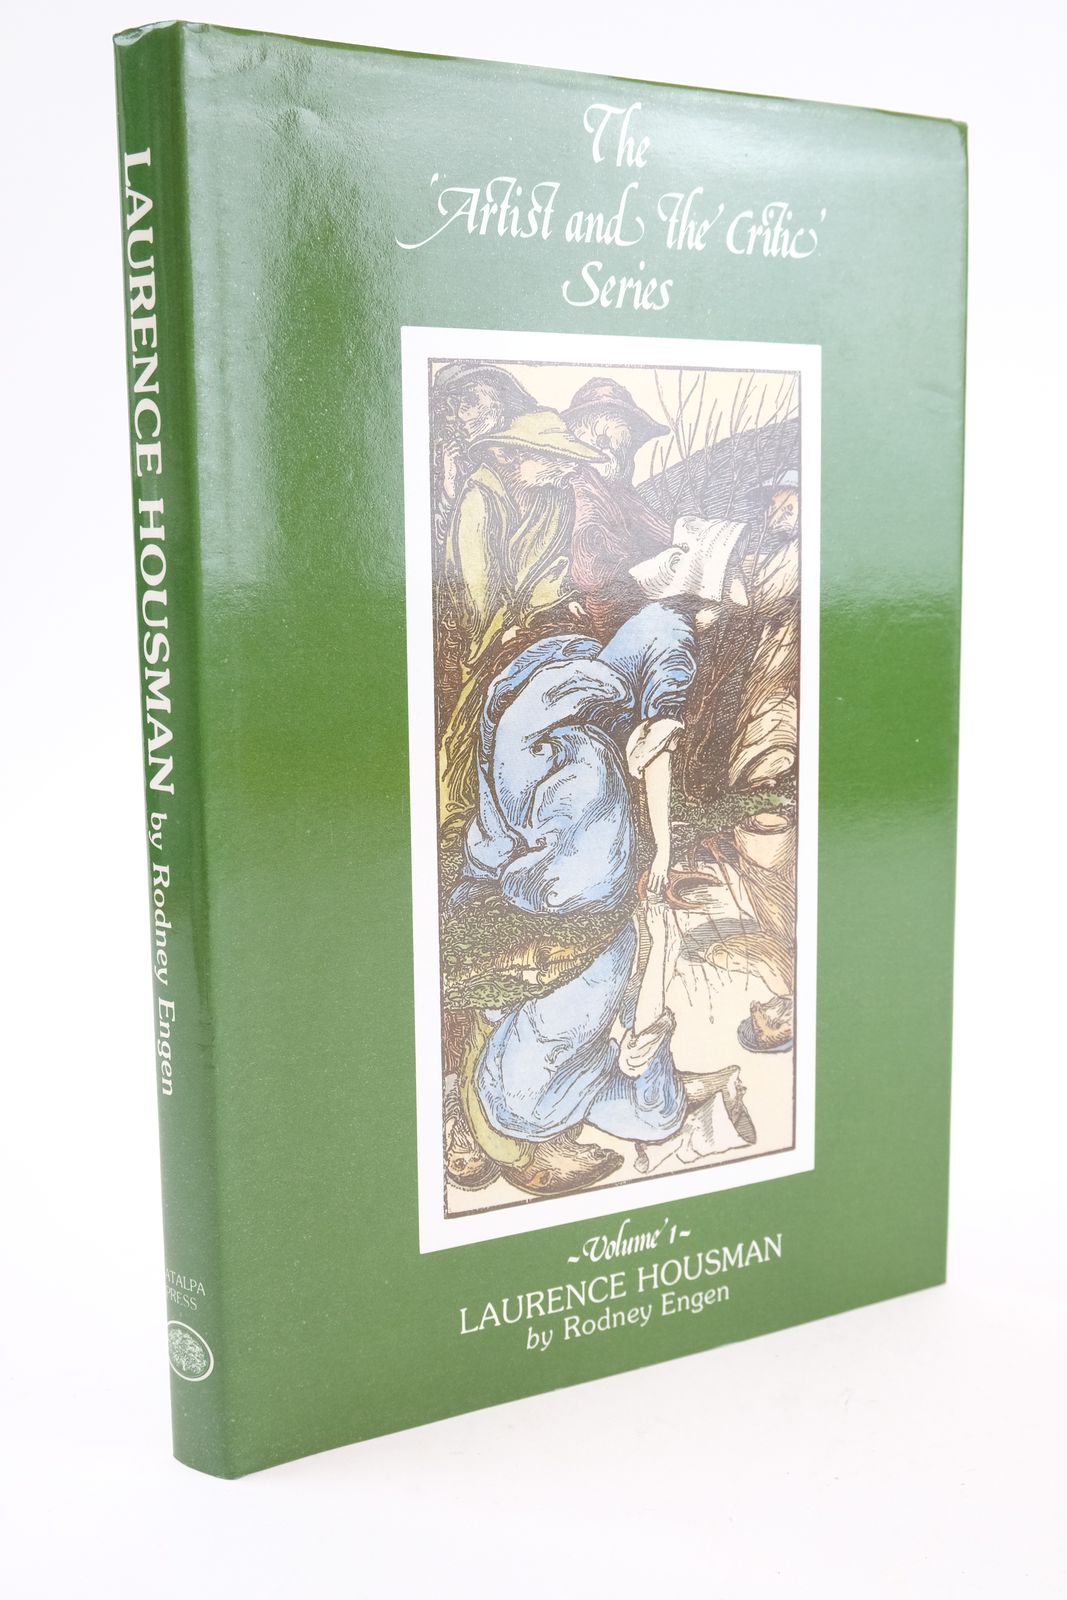 Photo of LAURENCE HOUSMAN written by Engen, Rodney illustrated by Housman, Laurence published by Catalpa Press Ltd (STOCK CODE: 1323936)  for sale by Stella & Rose's Books